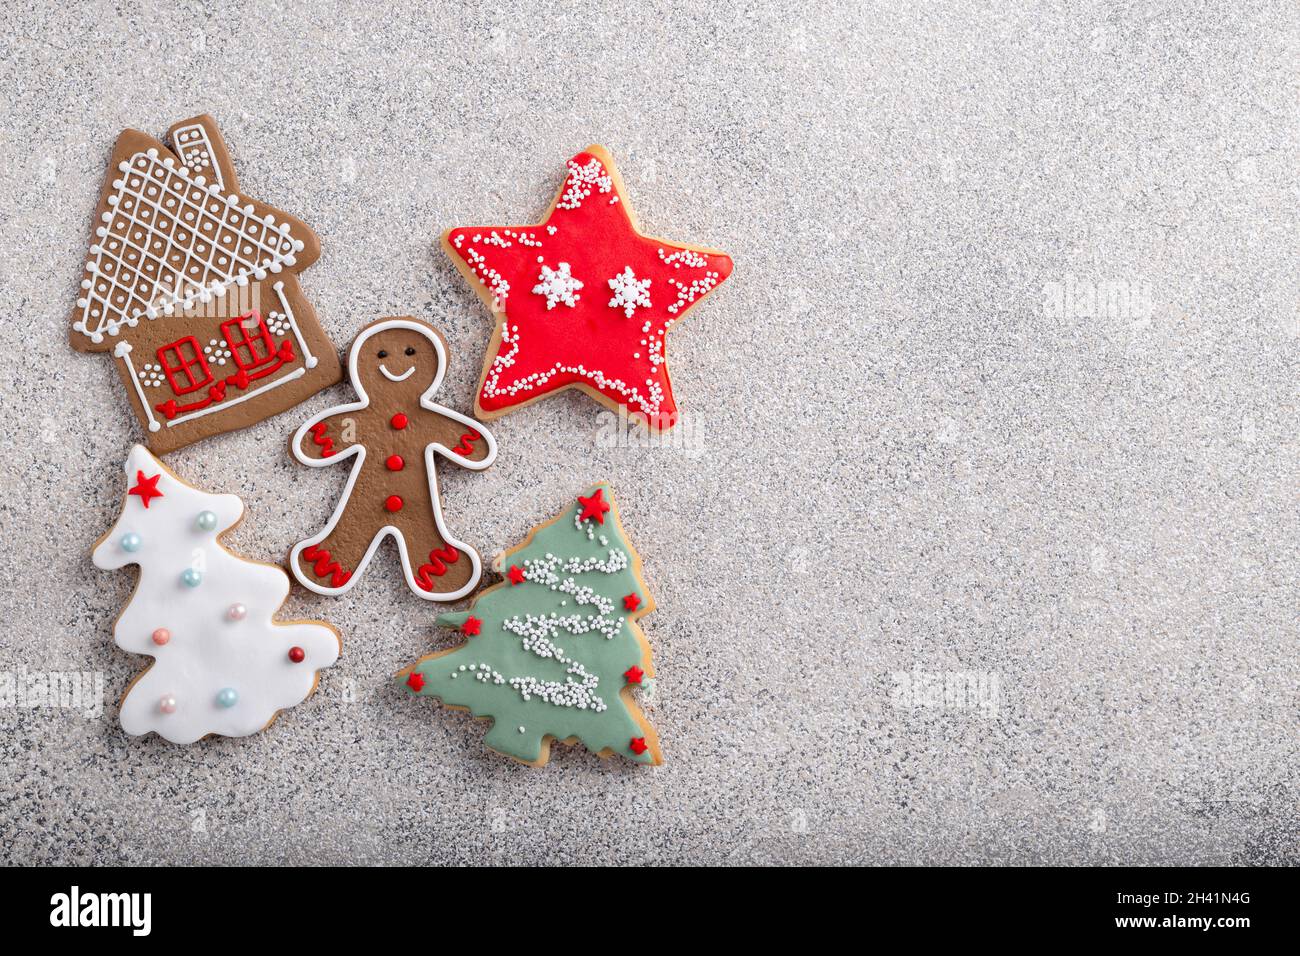 Gingerbread cookies decorated with icing sugar Stock Photo